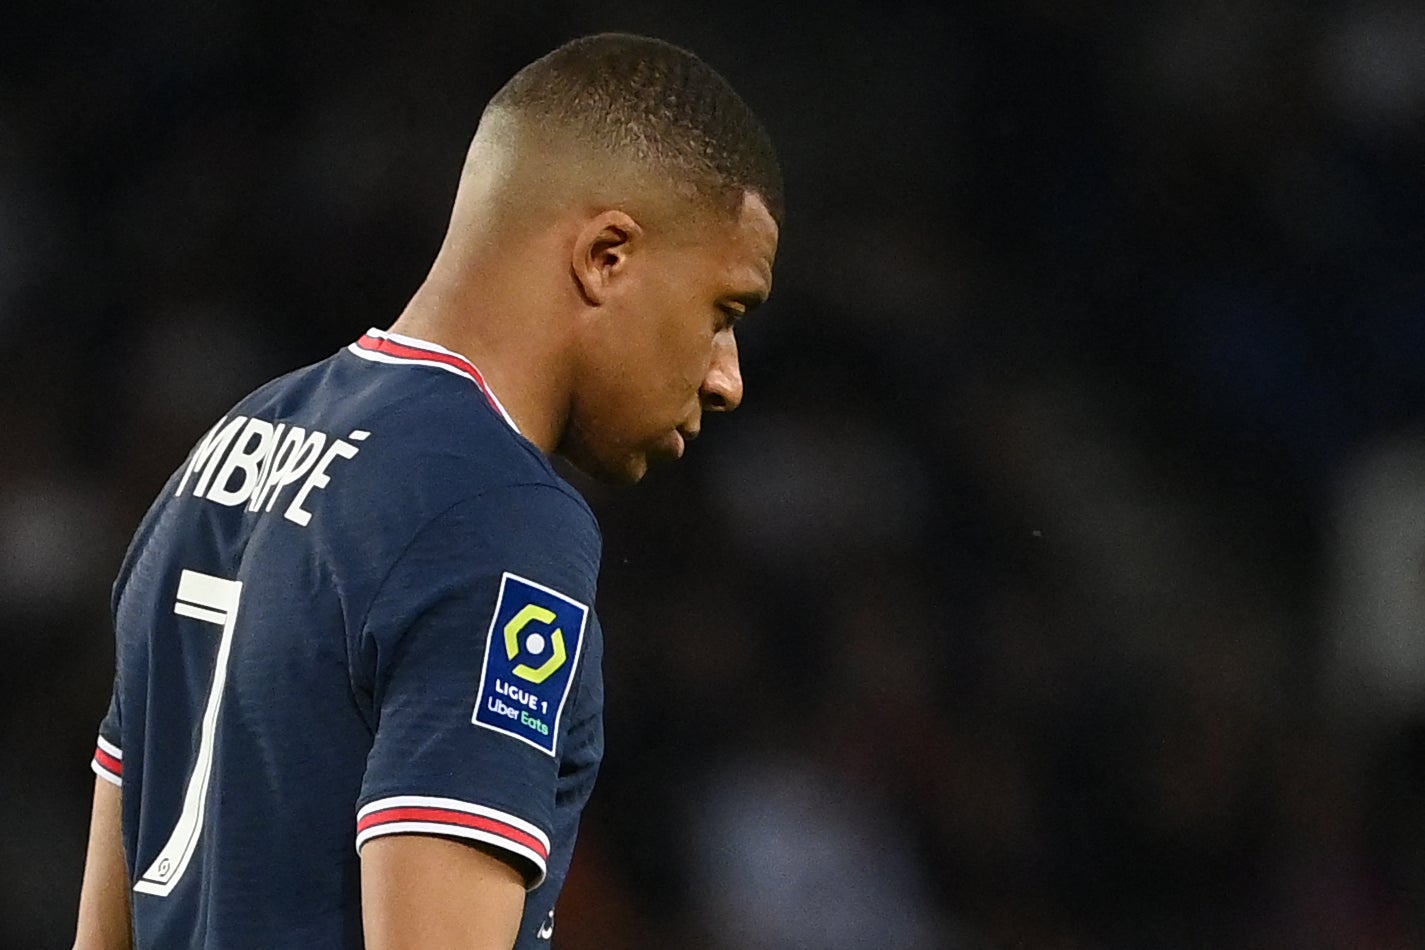 Real Madrid's massive bill to sign Kylian Mbappe this summer